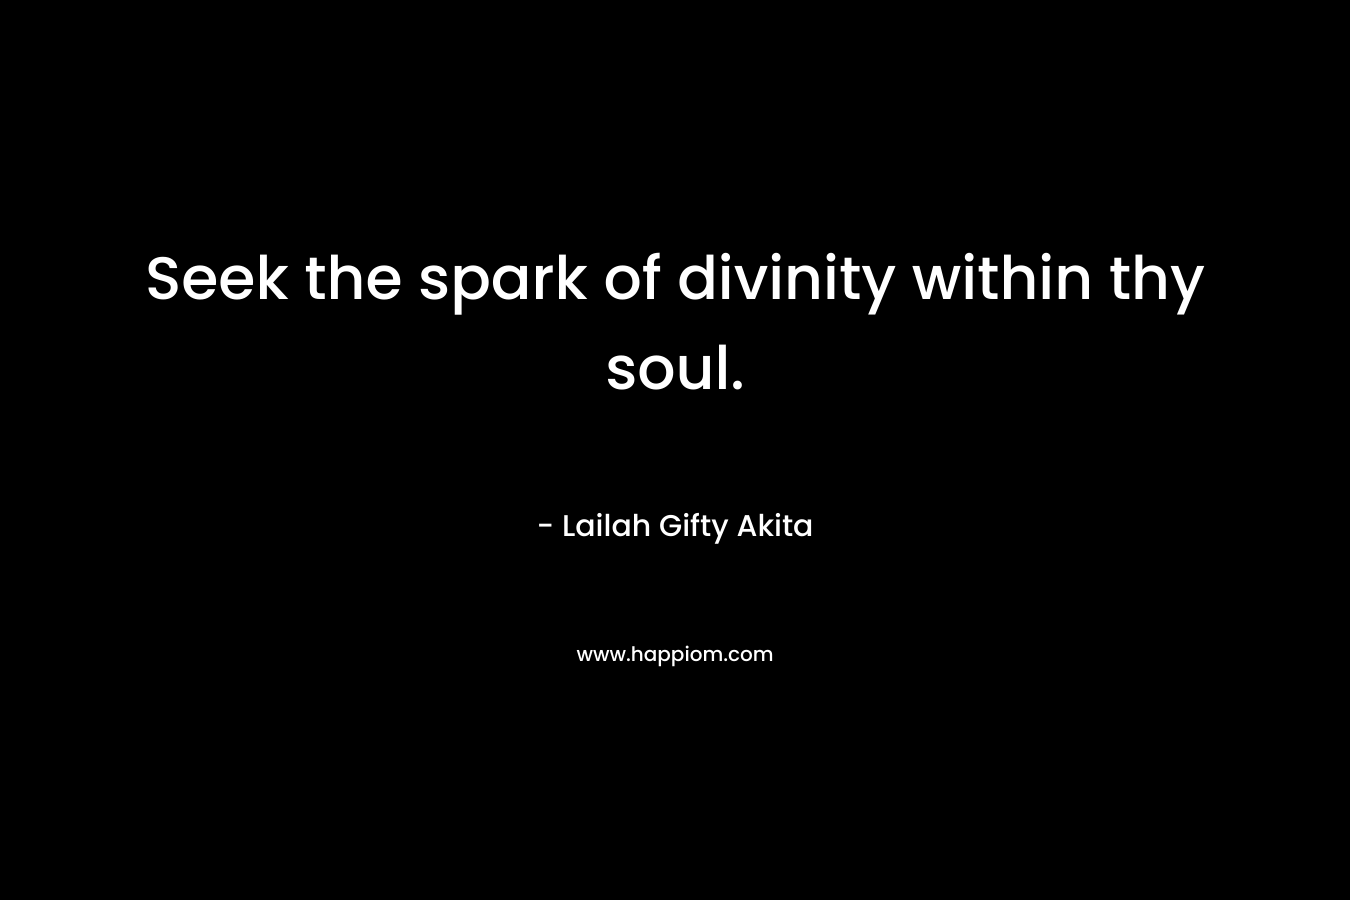 Seek the spark of divinity within thy soul.